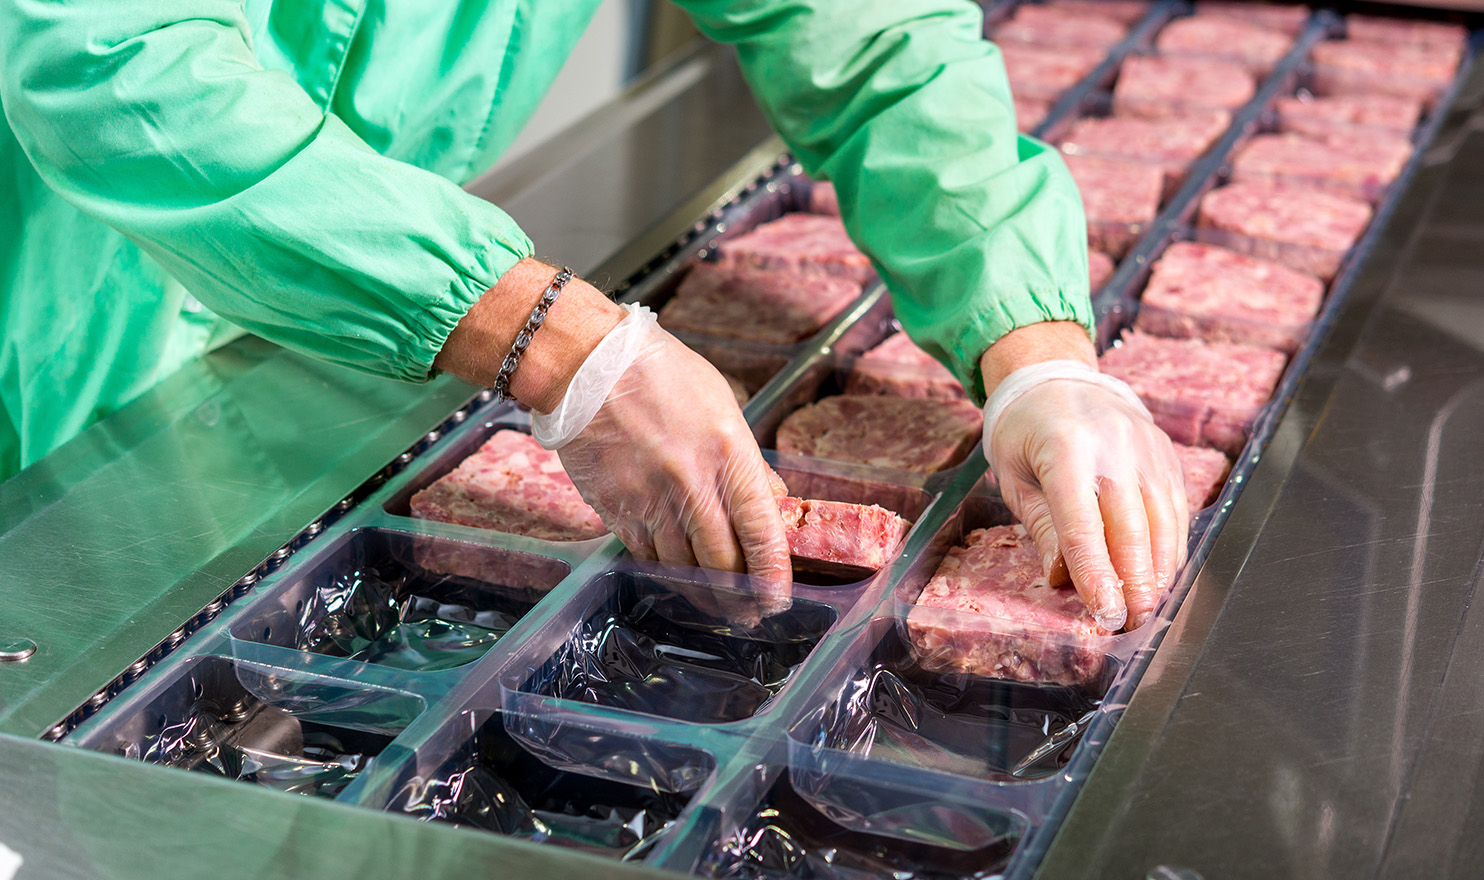 A pair of gloved hands are packaging ground meat into packaging. Food manufacturing insurance can help in cases where food gets someone sick.